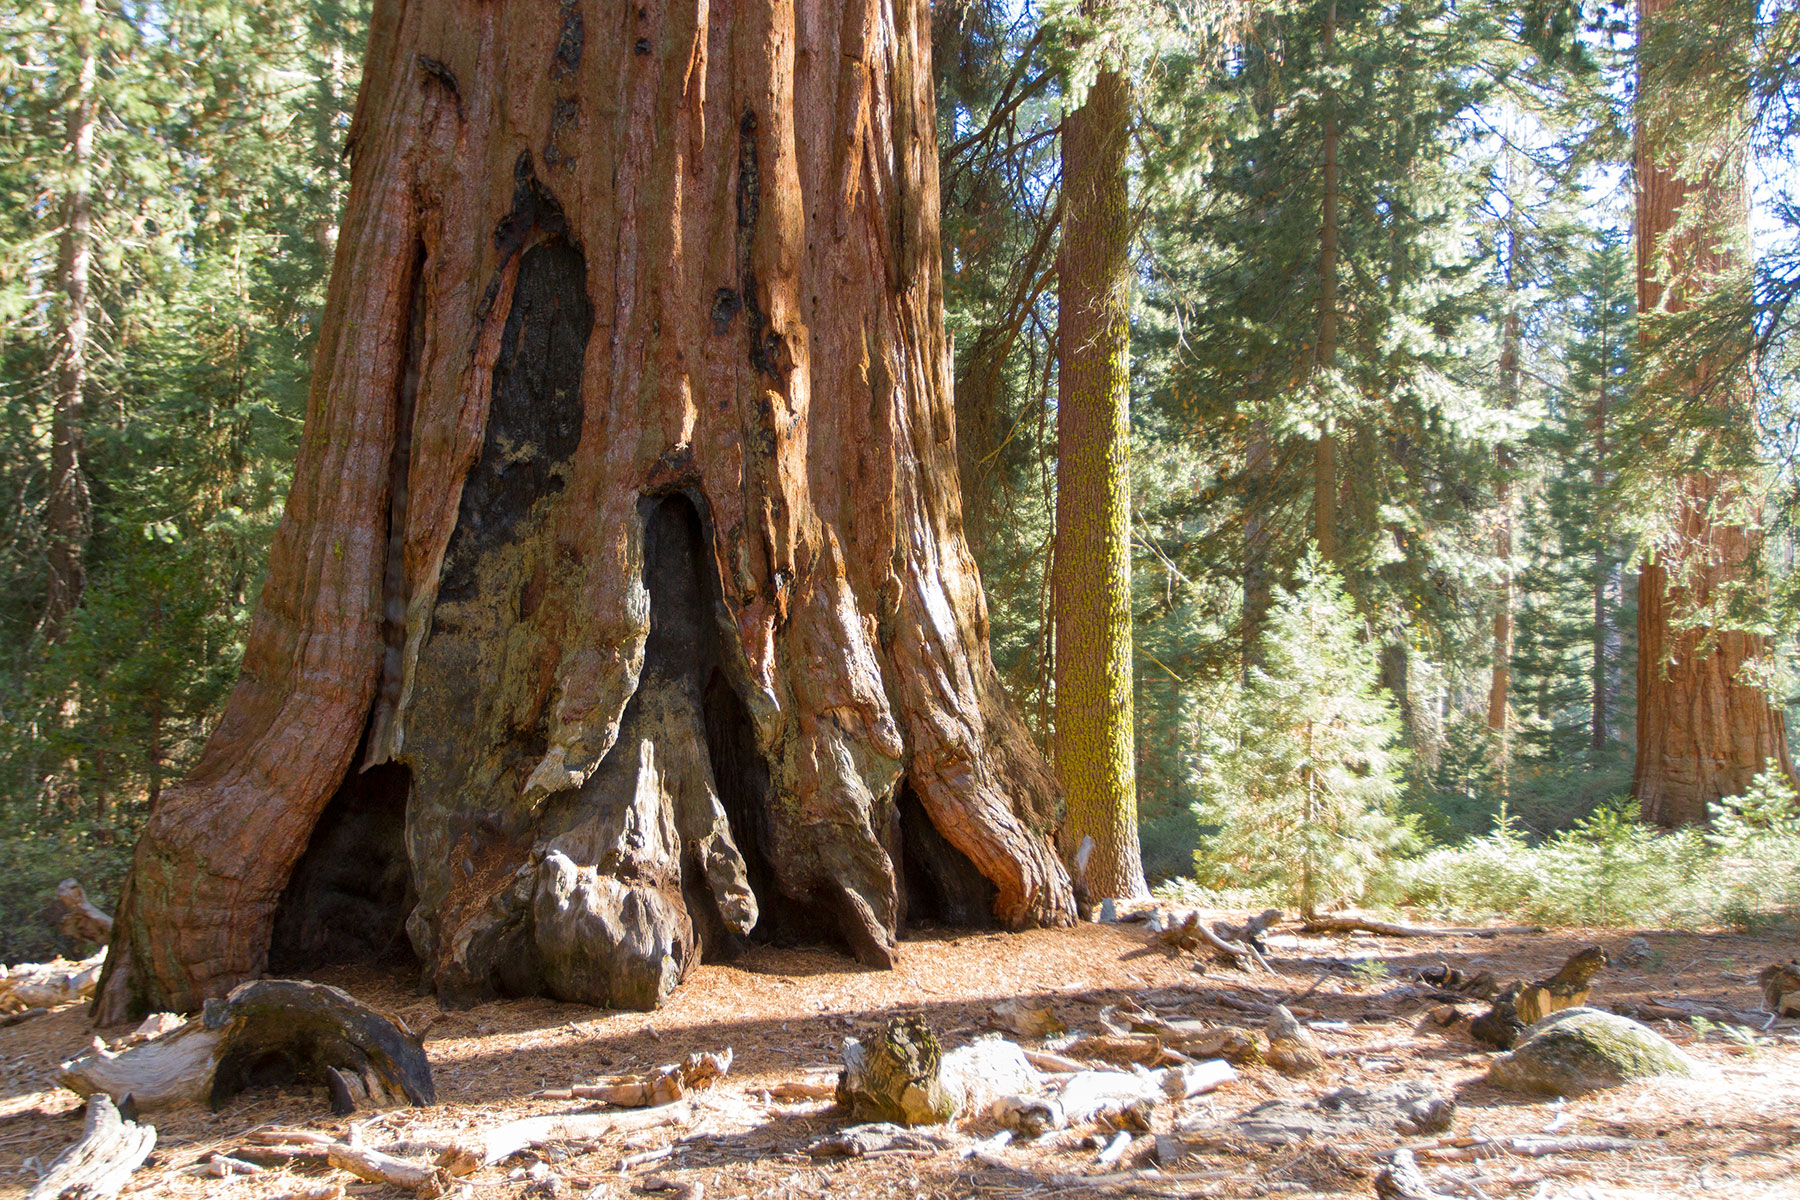 Exploring Giant Sequoia Groves - Sequoia & Kings Canyon National Parks